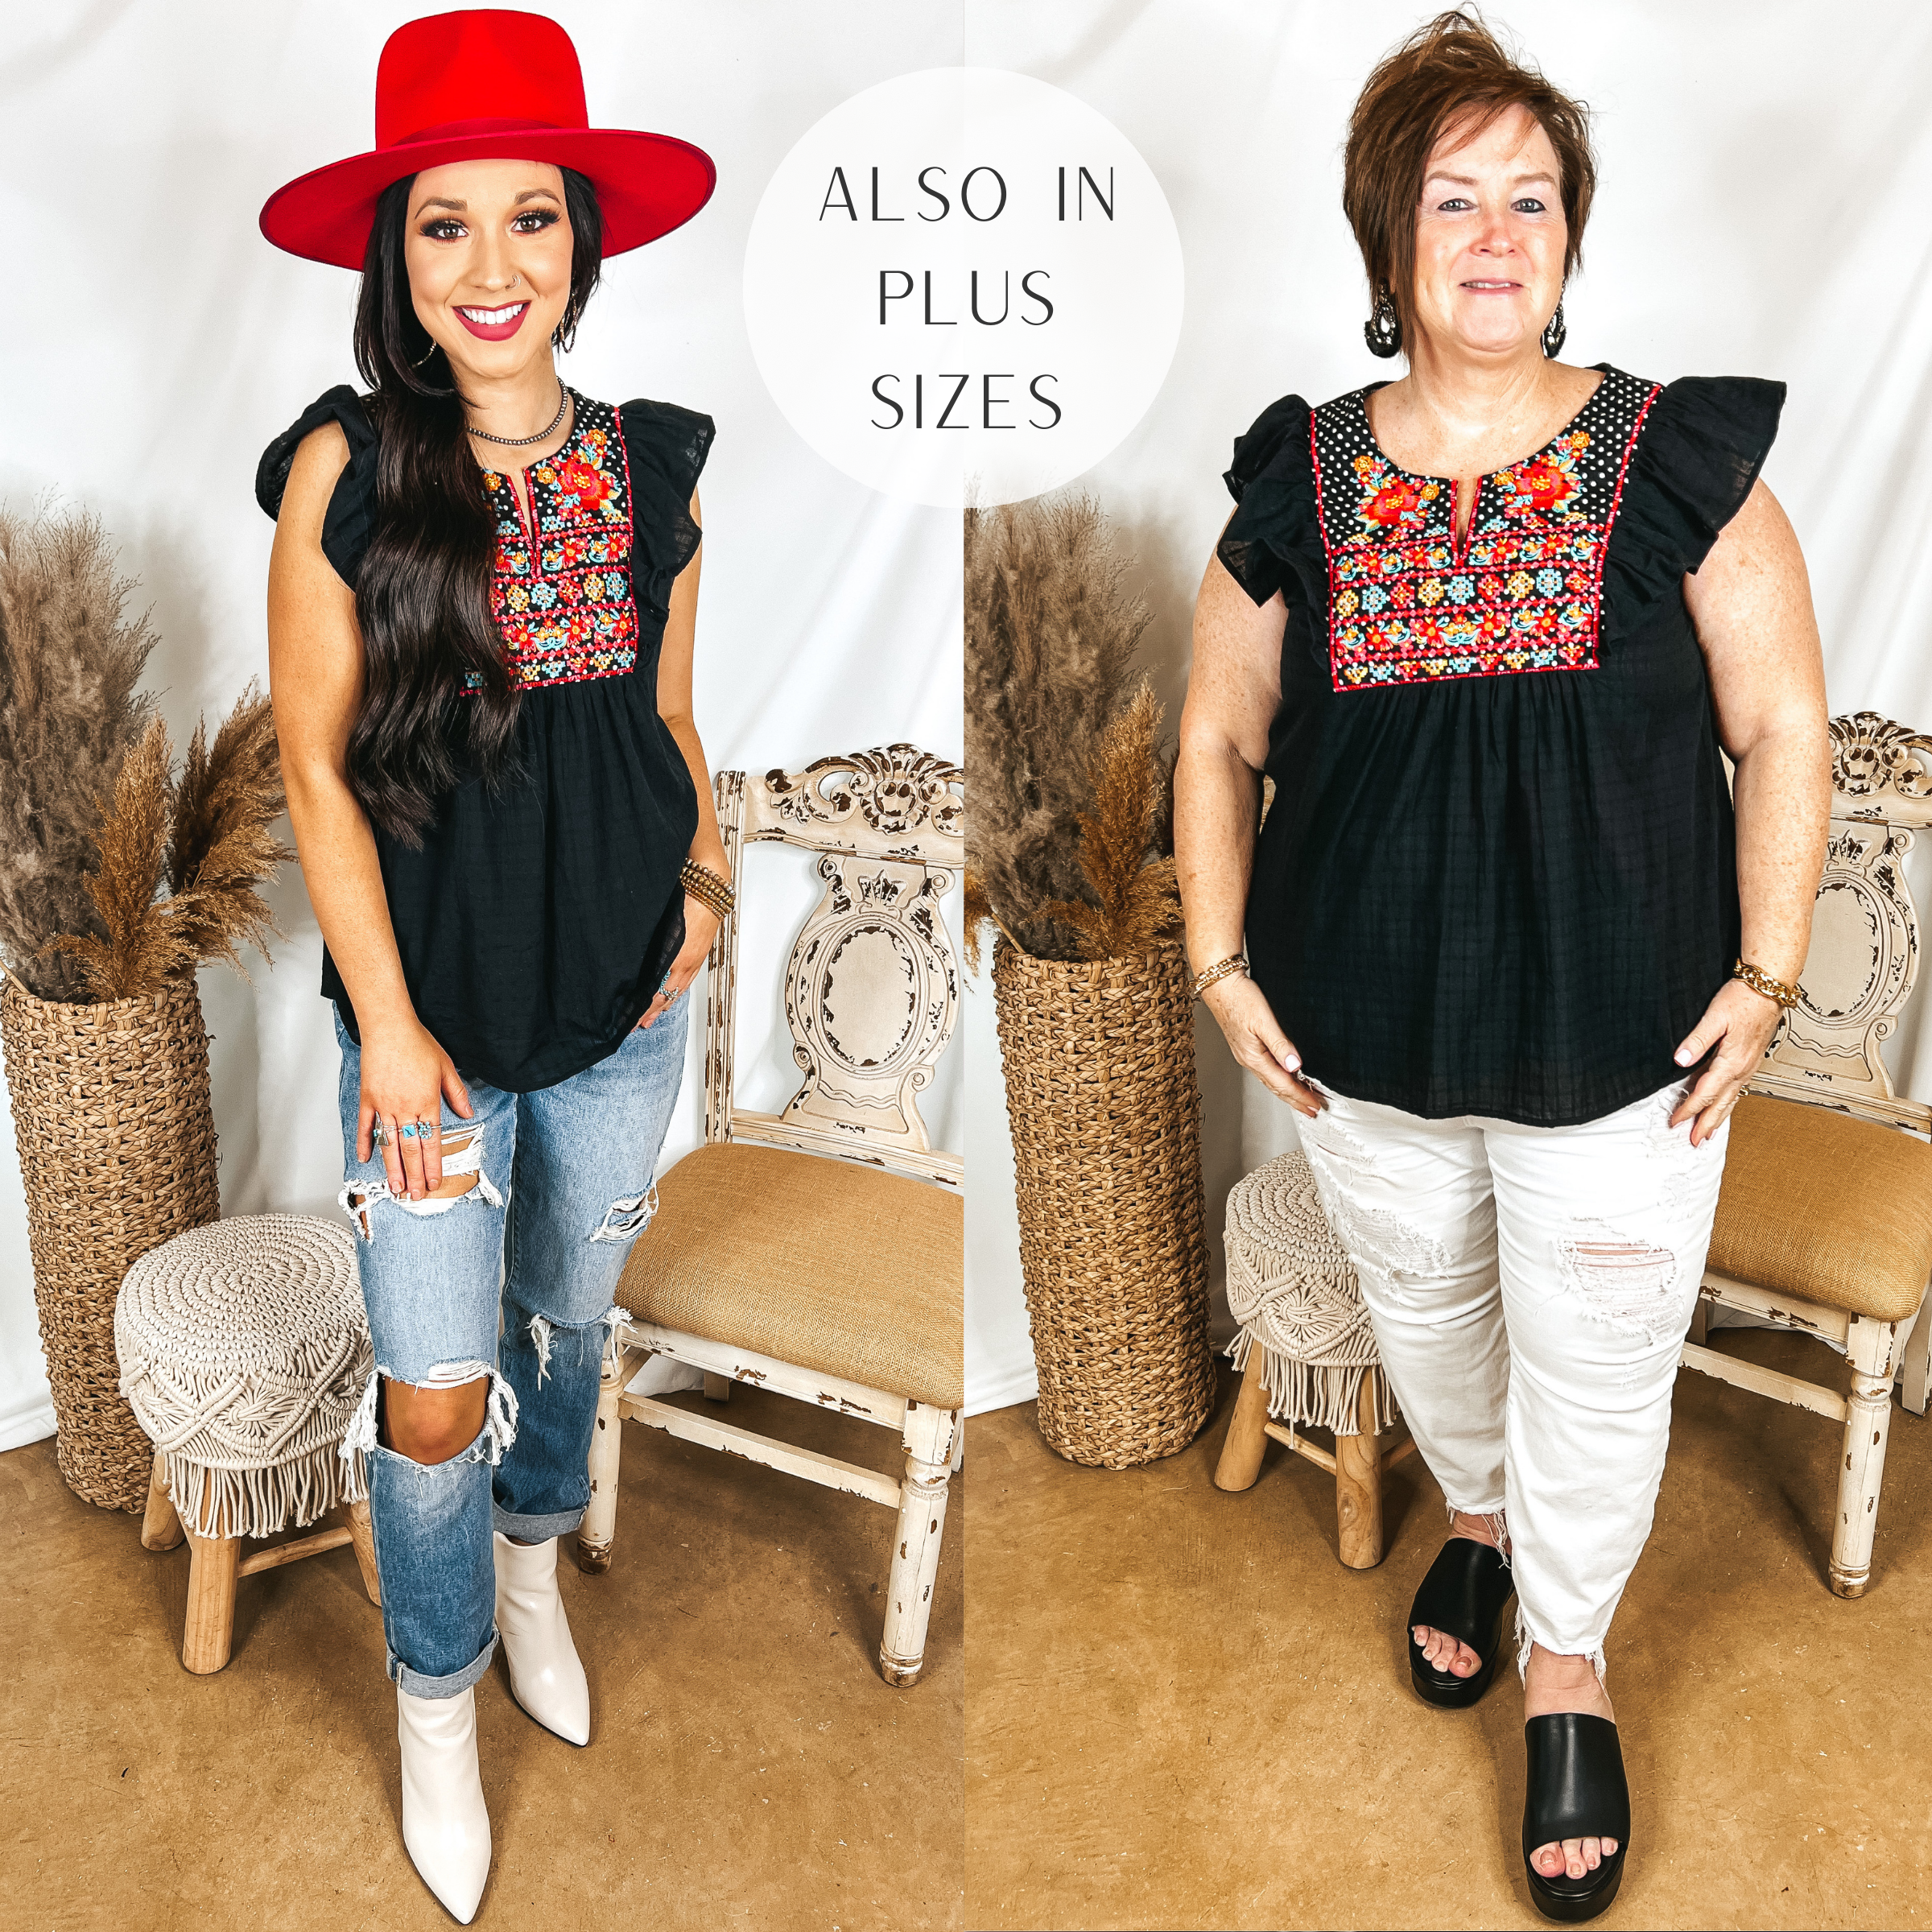 Models are wearing a black top with ruffle cap sleeves and an embroidered yoke. Size small model has it paired with distressed, light wash jeans, white booties, and a red felt hat. Plus size model has it paired with white distressed jeans, black sandals, and black jewelry.